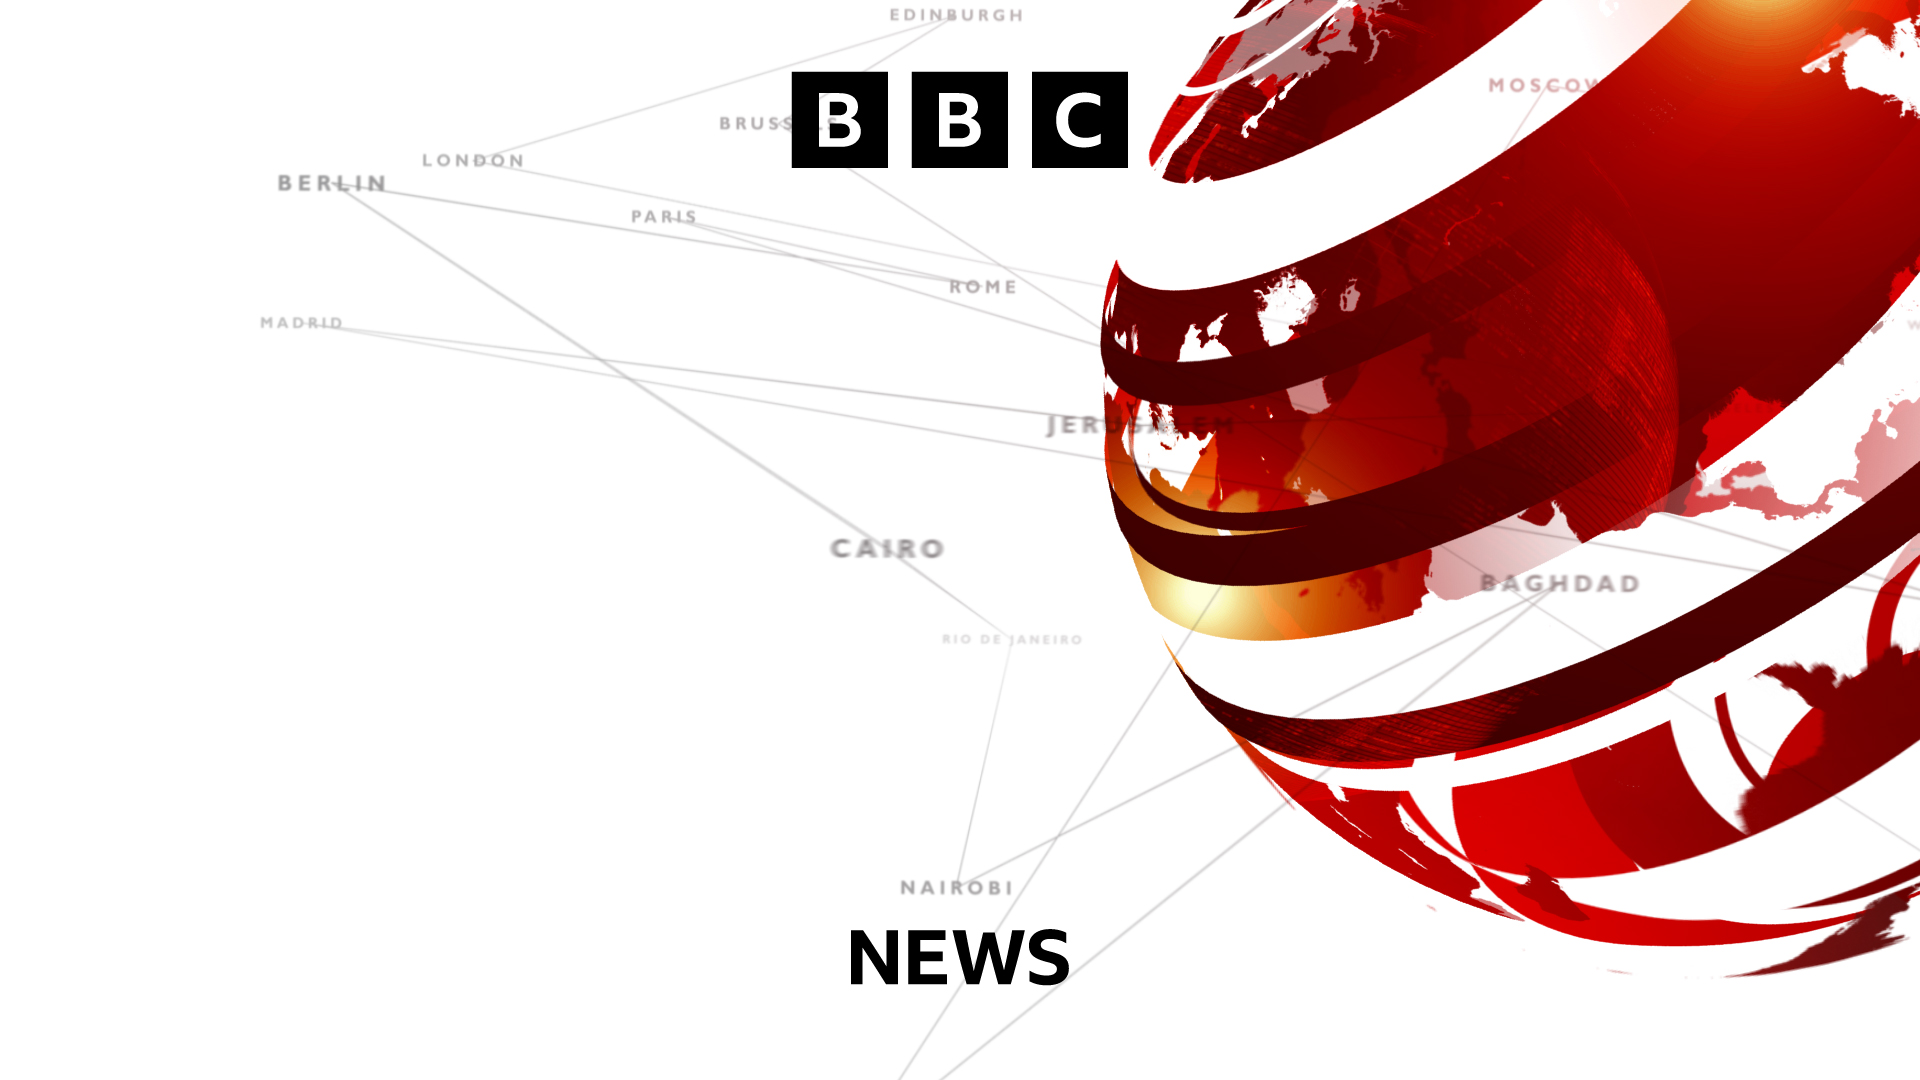 Tune into BBC News airing on your local public television station!